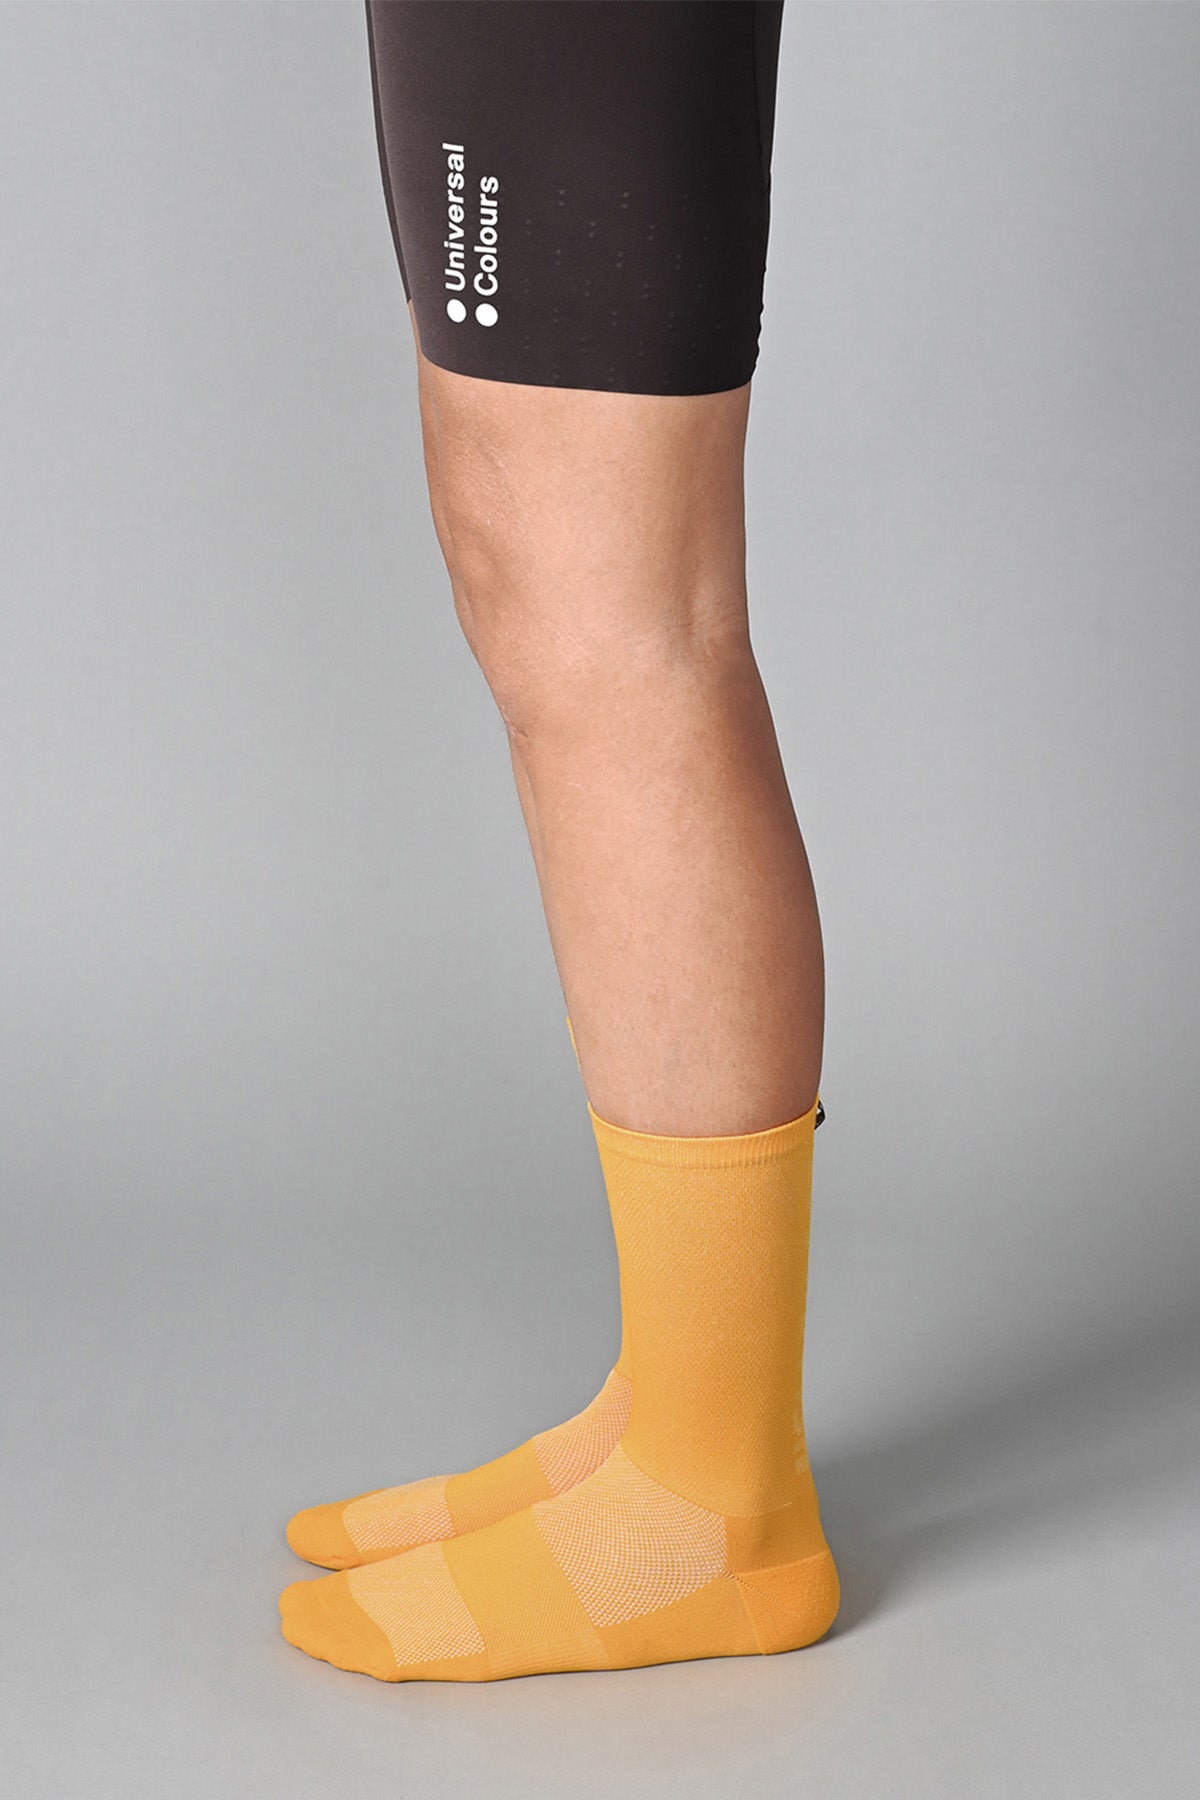 STEALTH - BURNT YELLOW SIDE | BEST CYCLING SOCKS